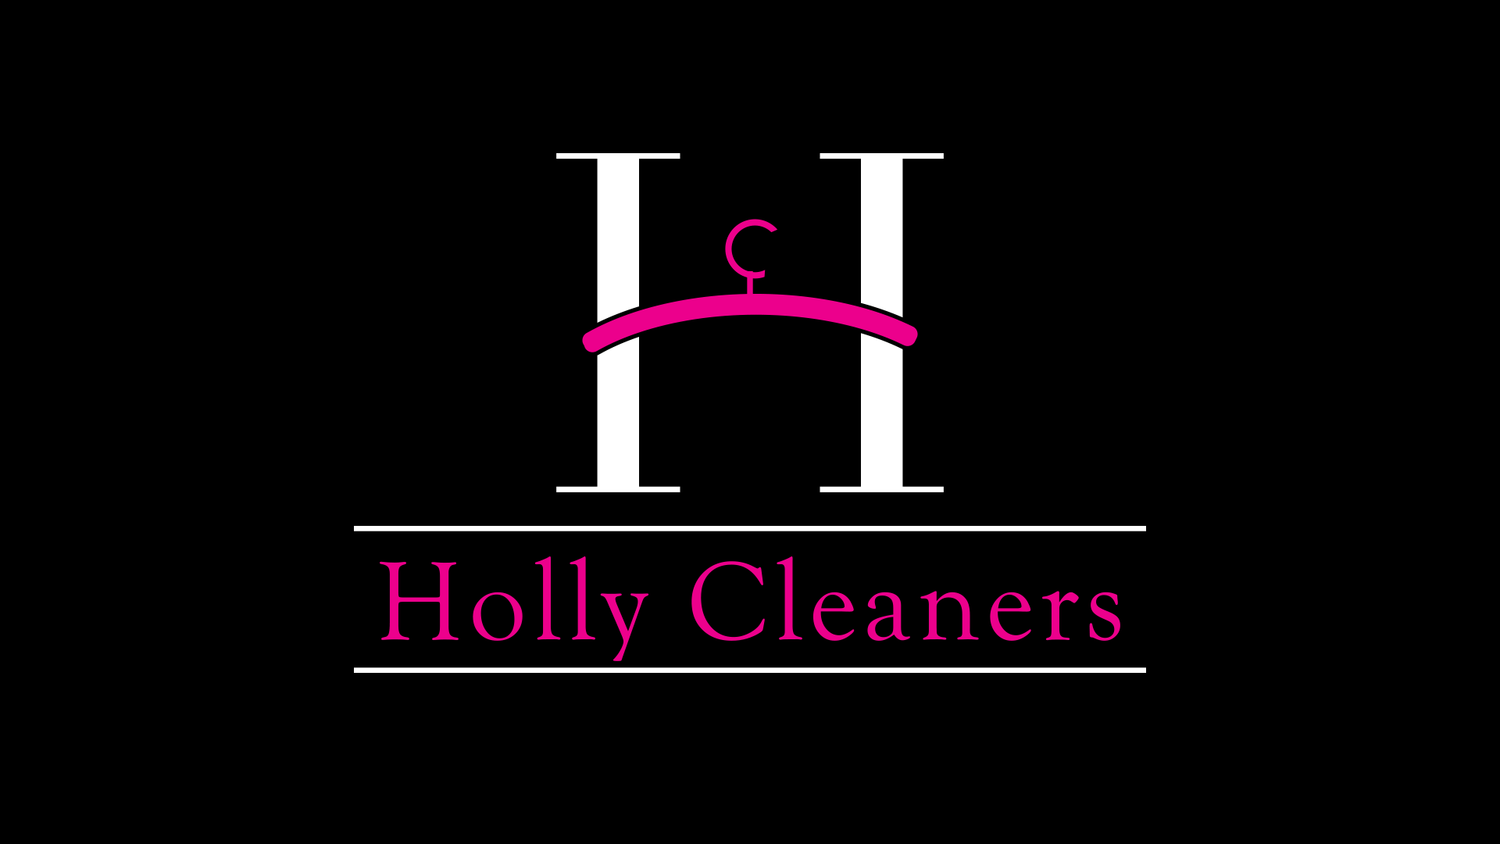 The Division Cleaners Logo - Holly Cleaners